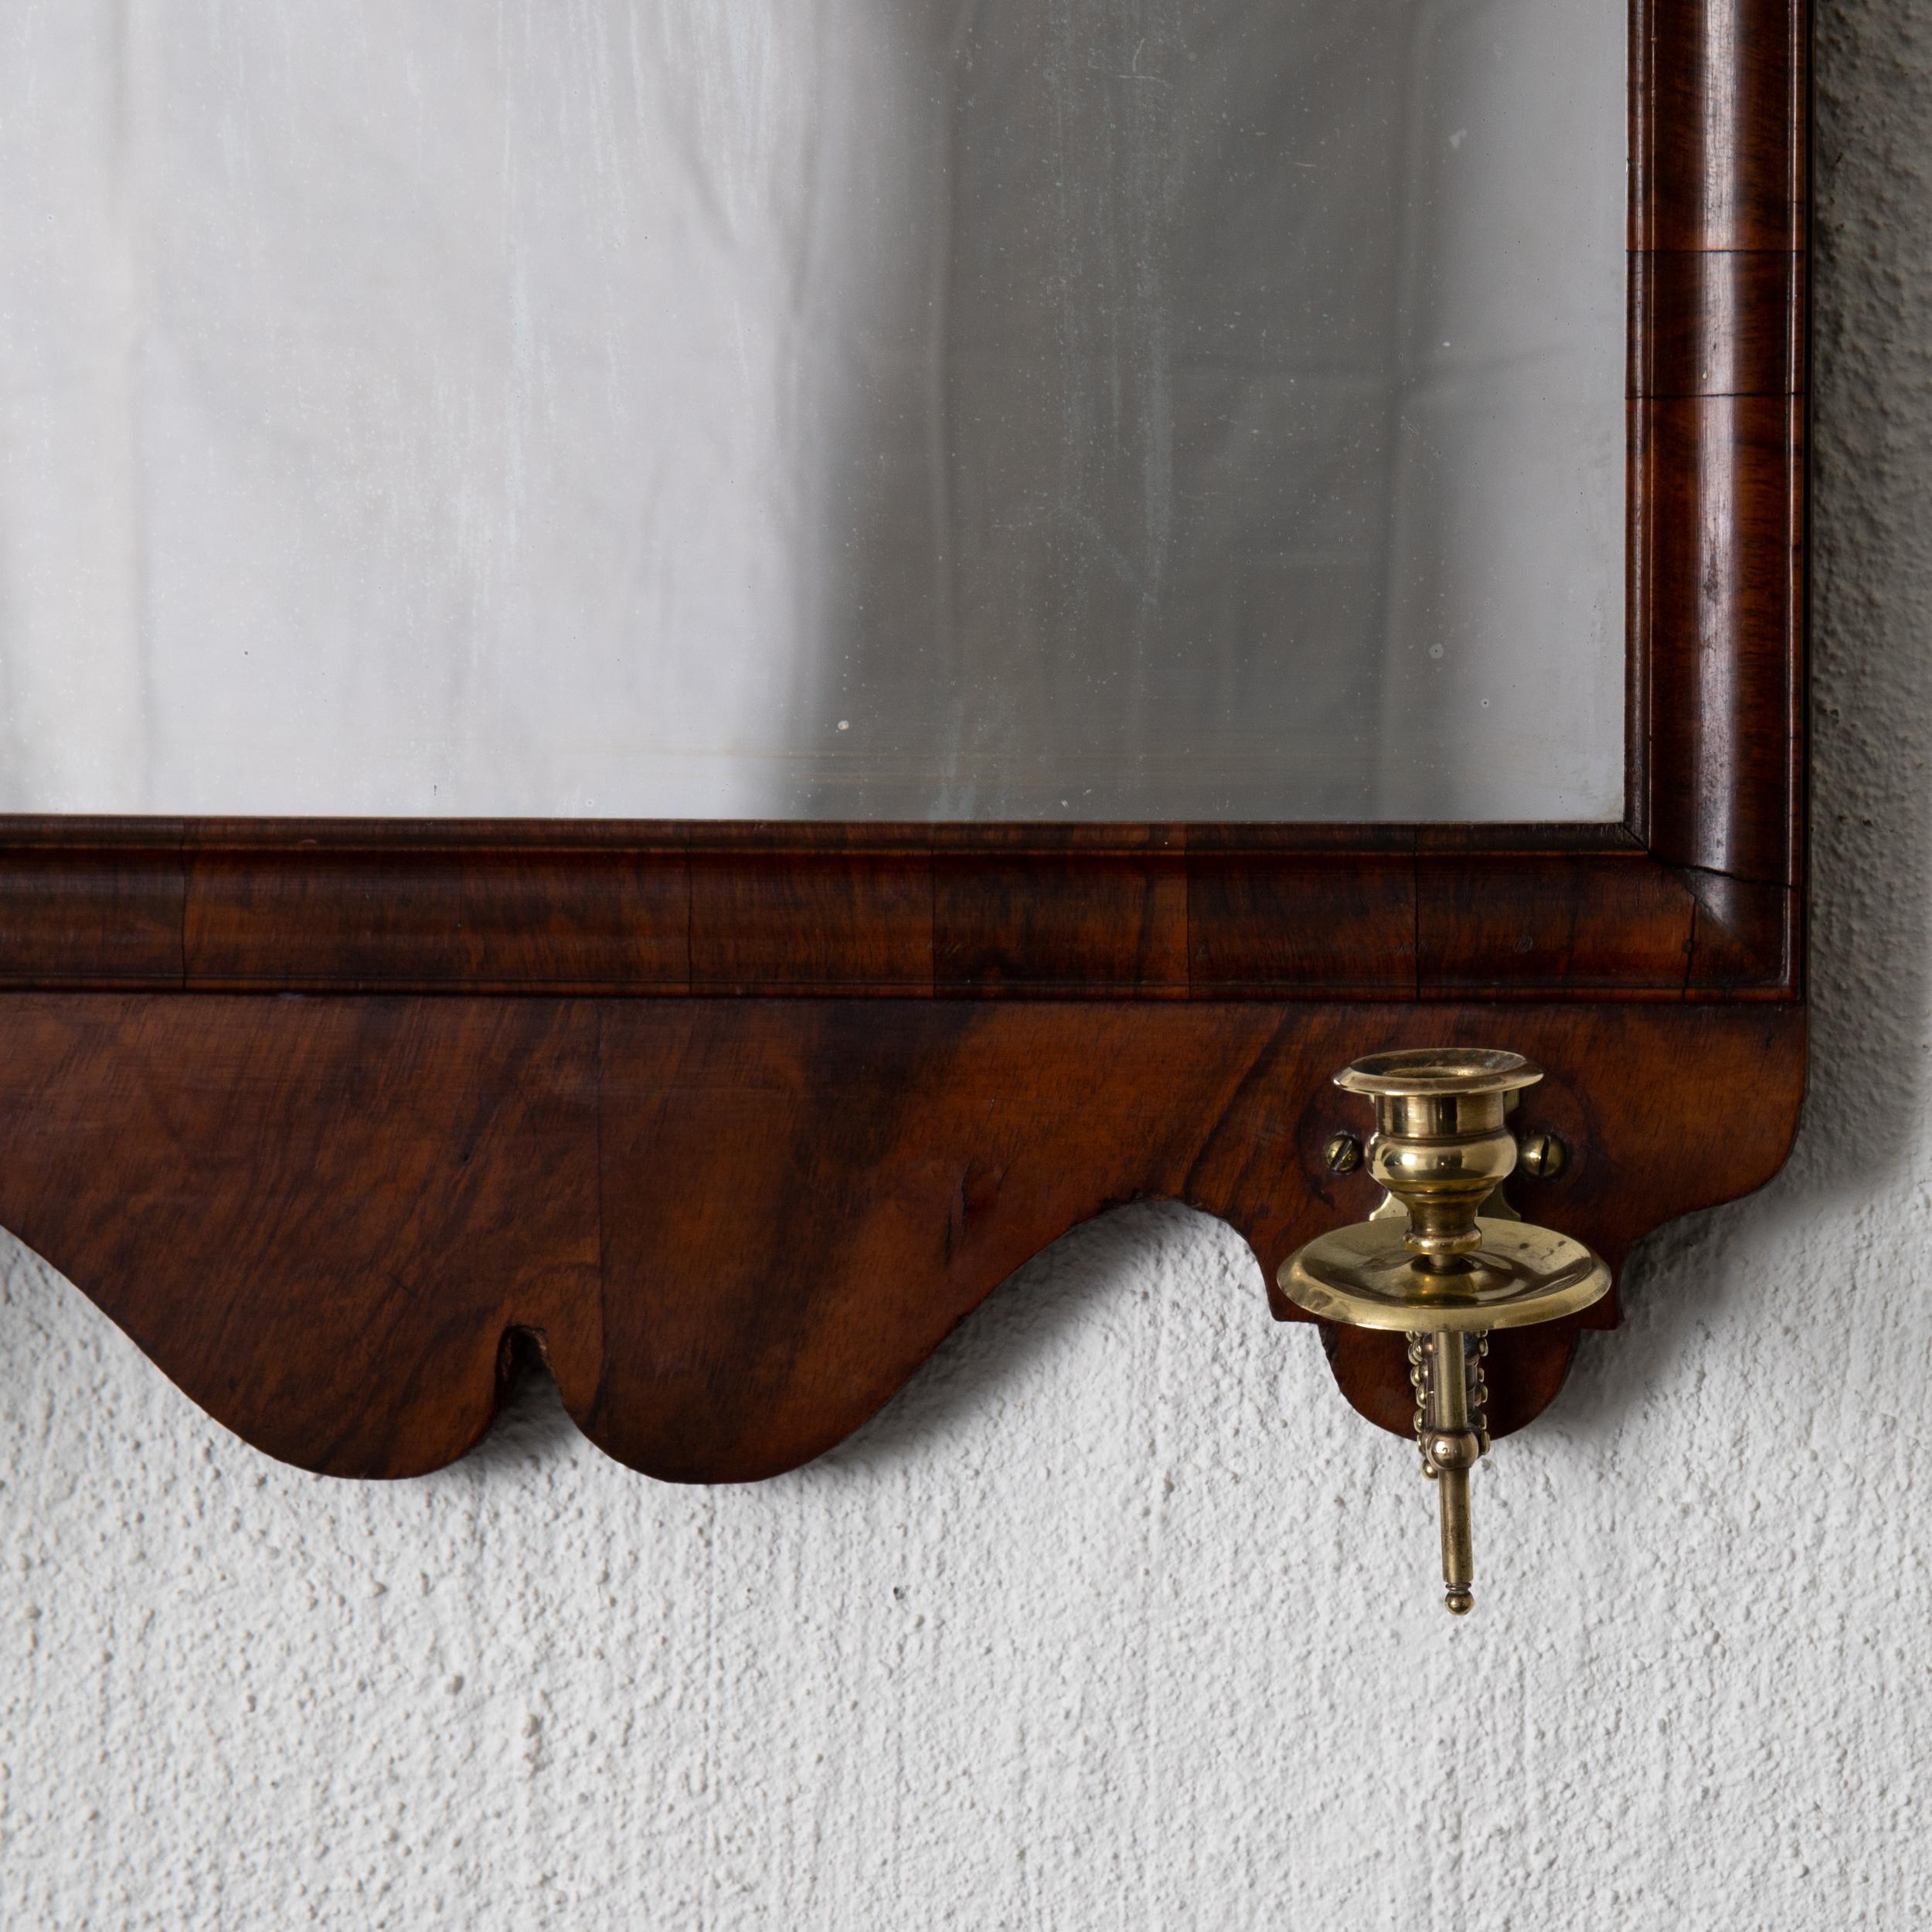 Mirror sconce large English 18th century mahogany 2 candleholders England. Frame in dark brown mahogany. Two candleholders extendable in brass.